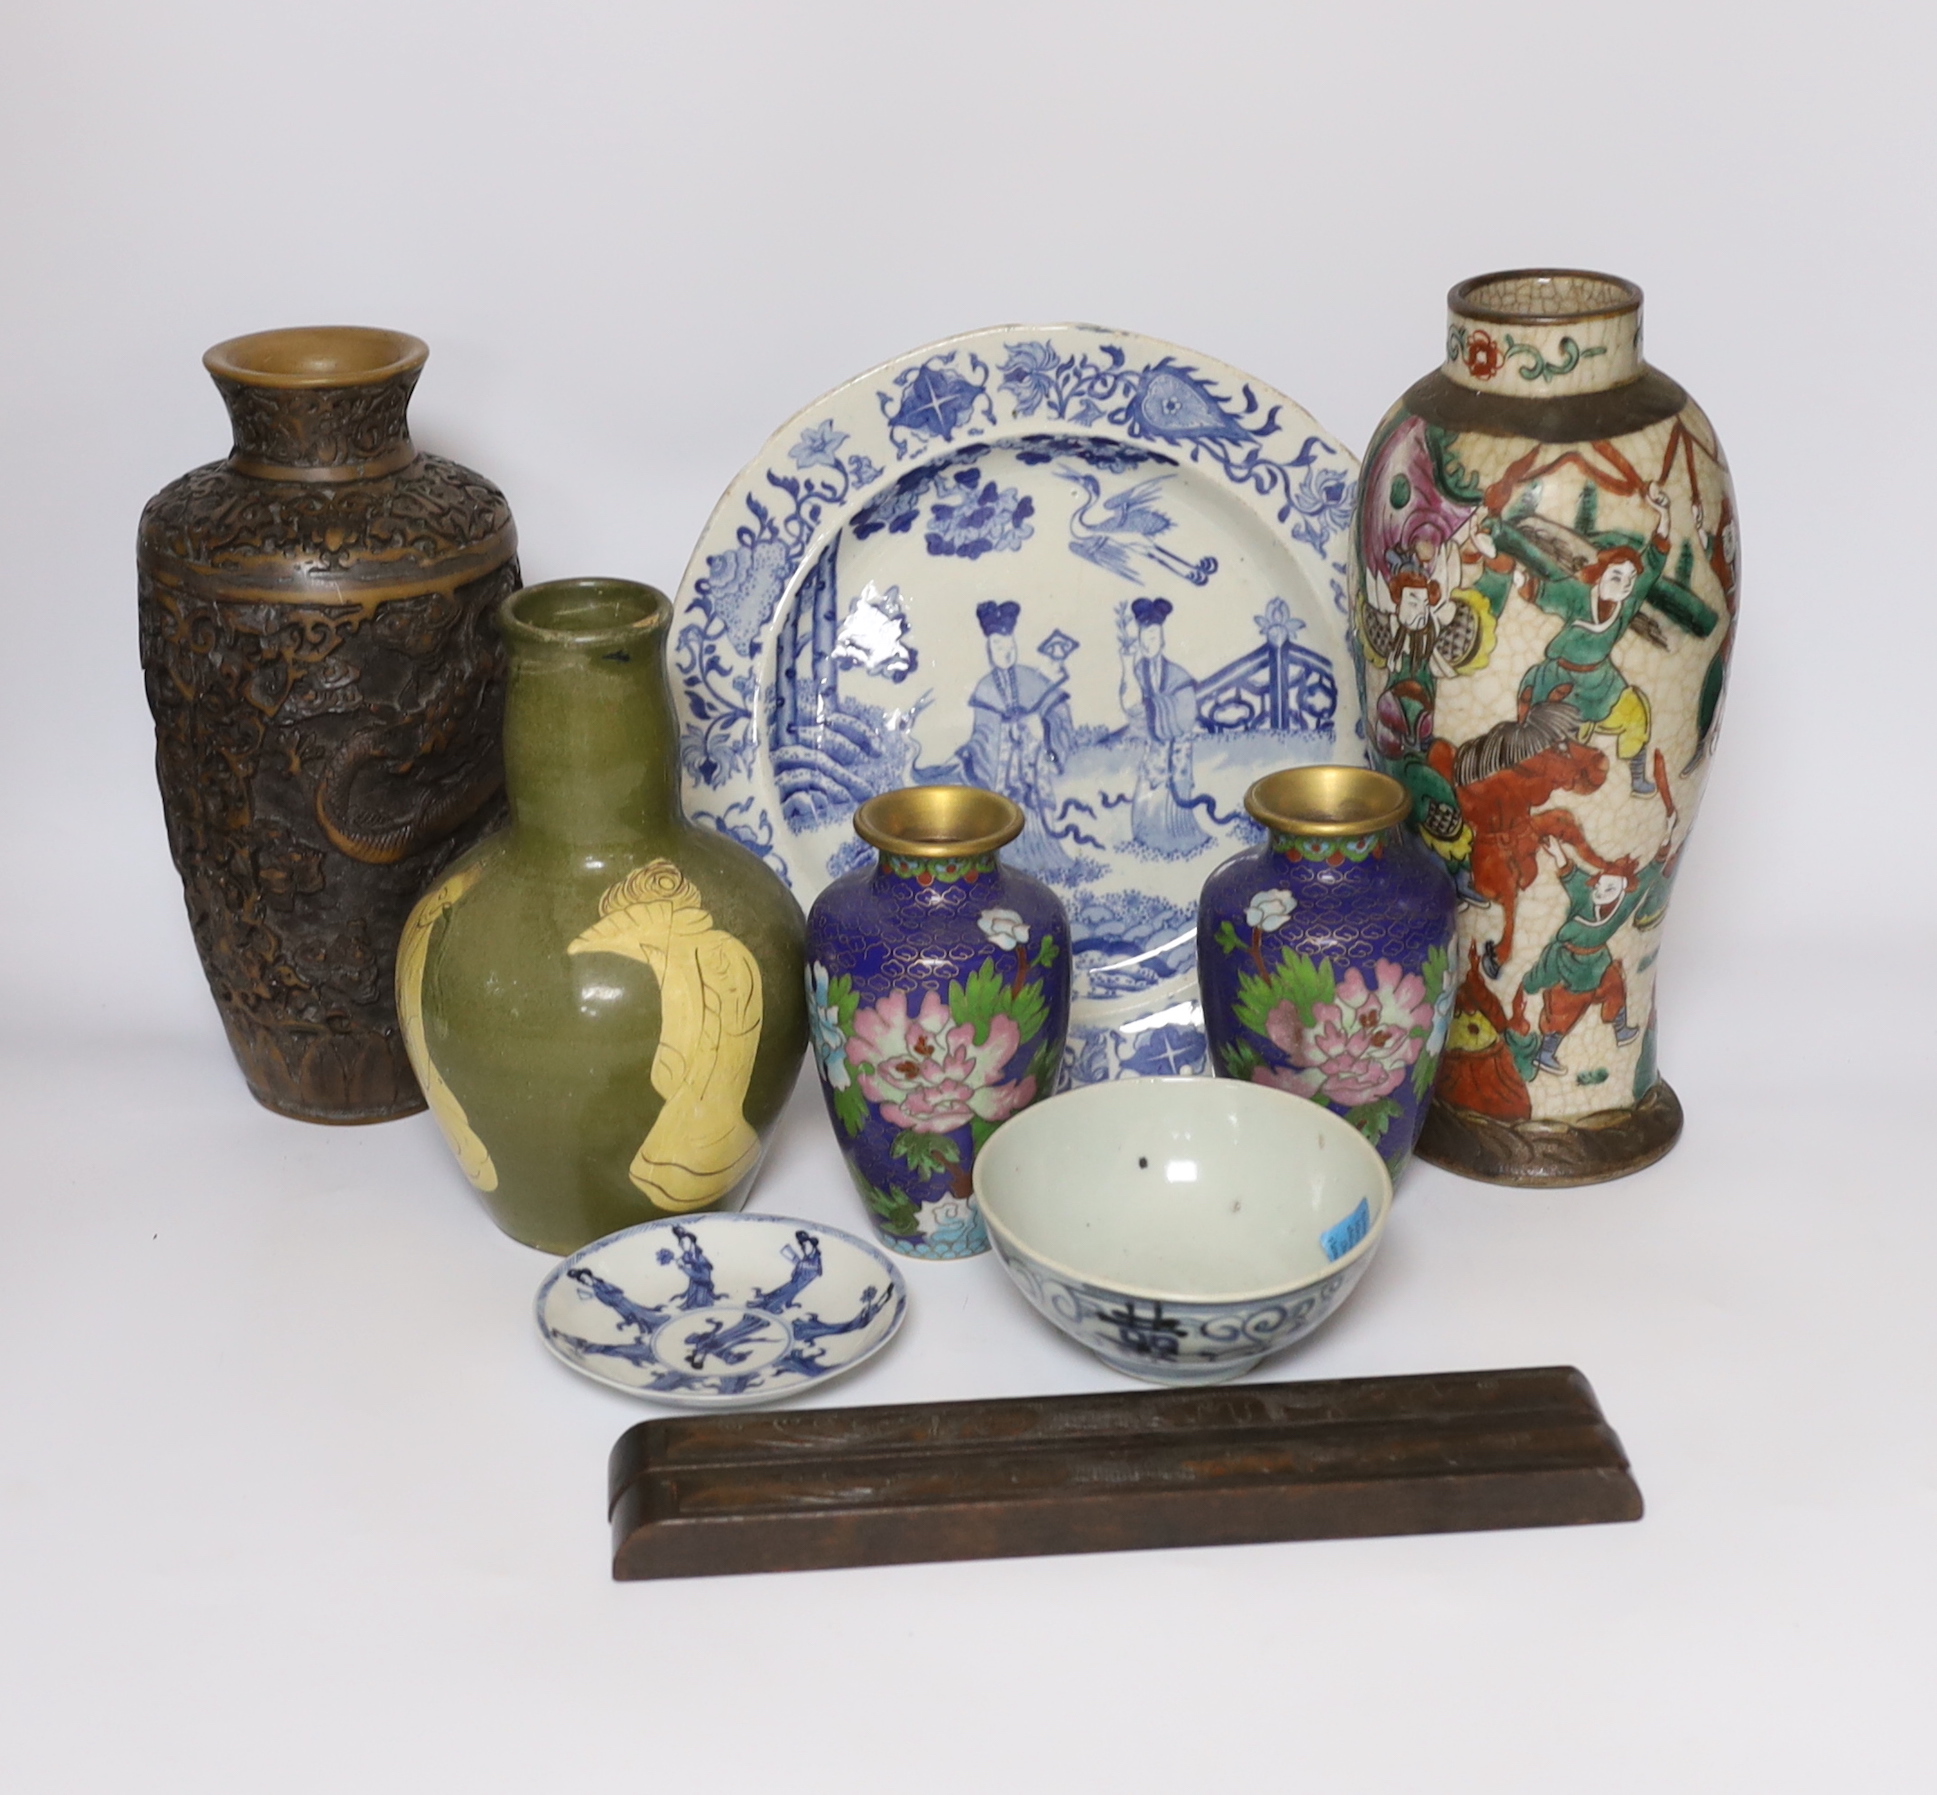 Mixed Chinese and Japanese ceramics including pair of cloisonné vases, a blue and white dish and a